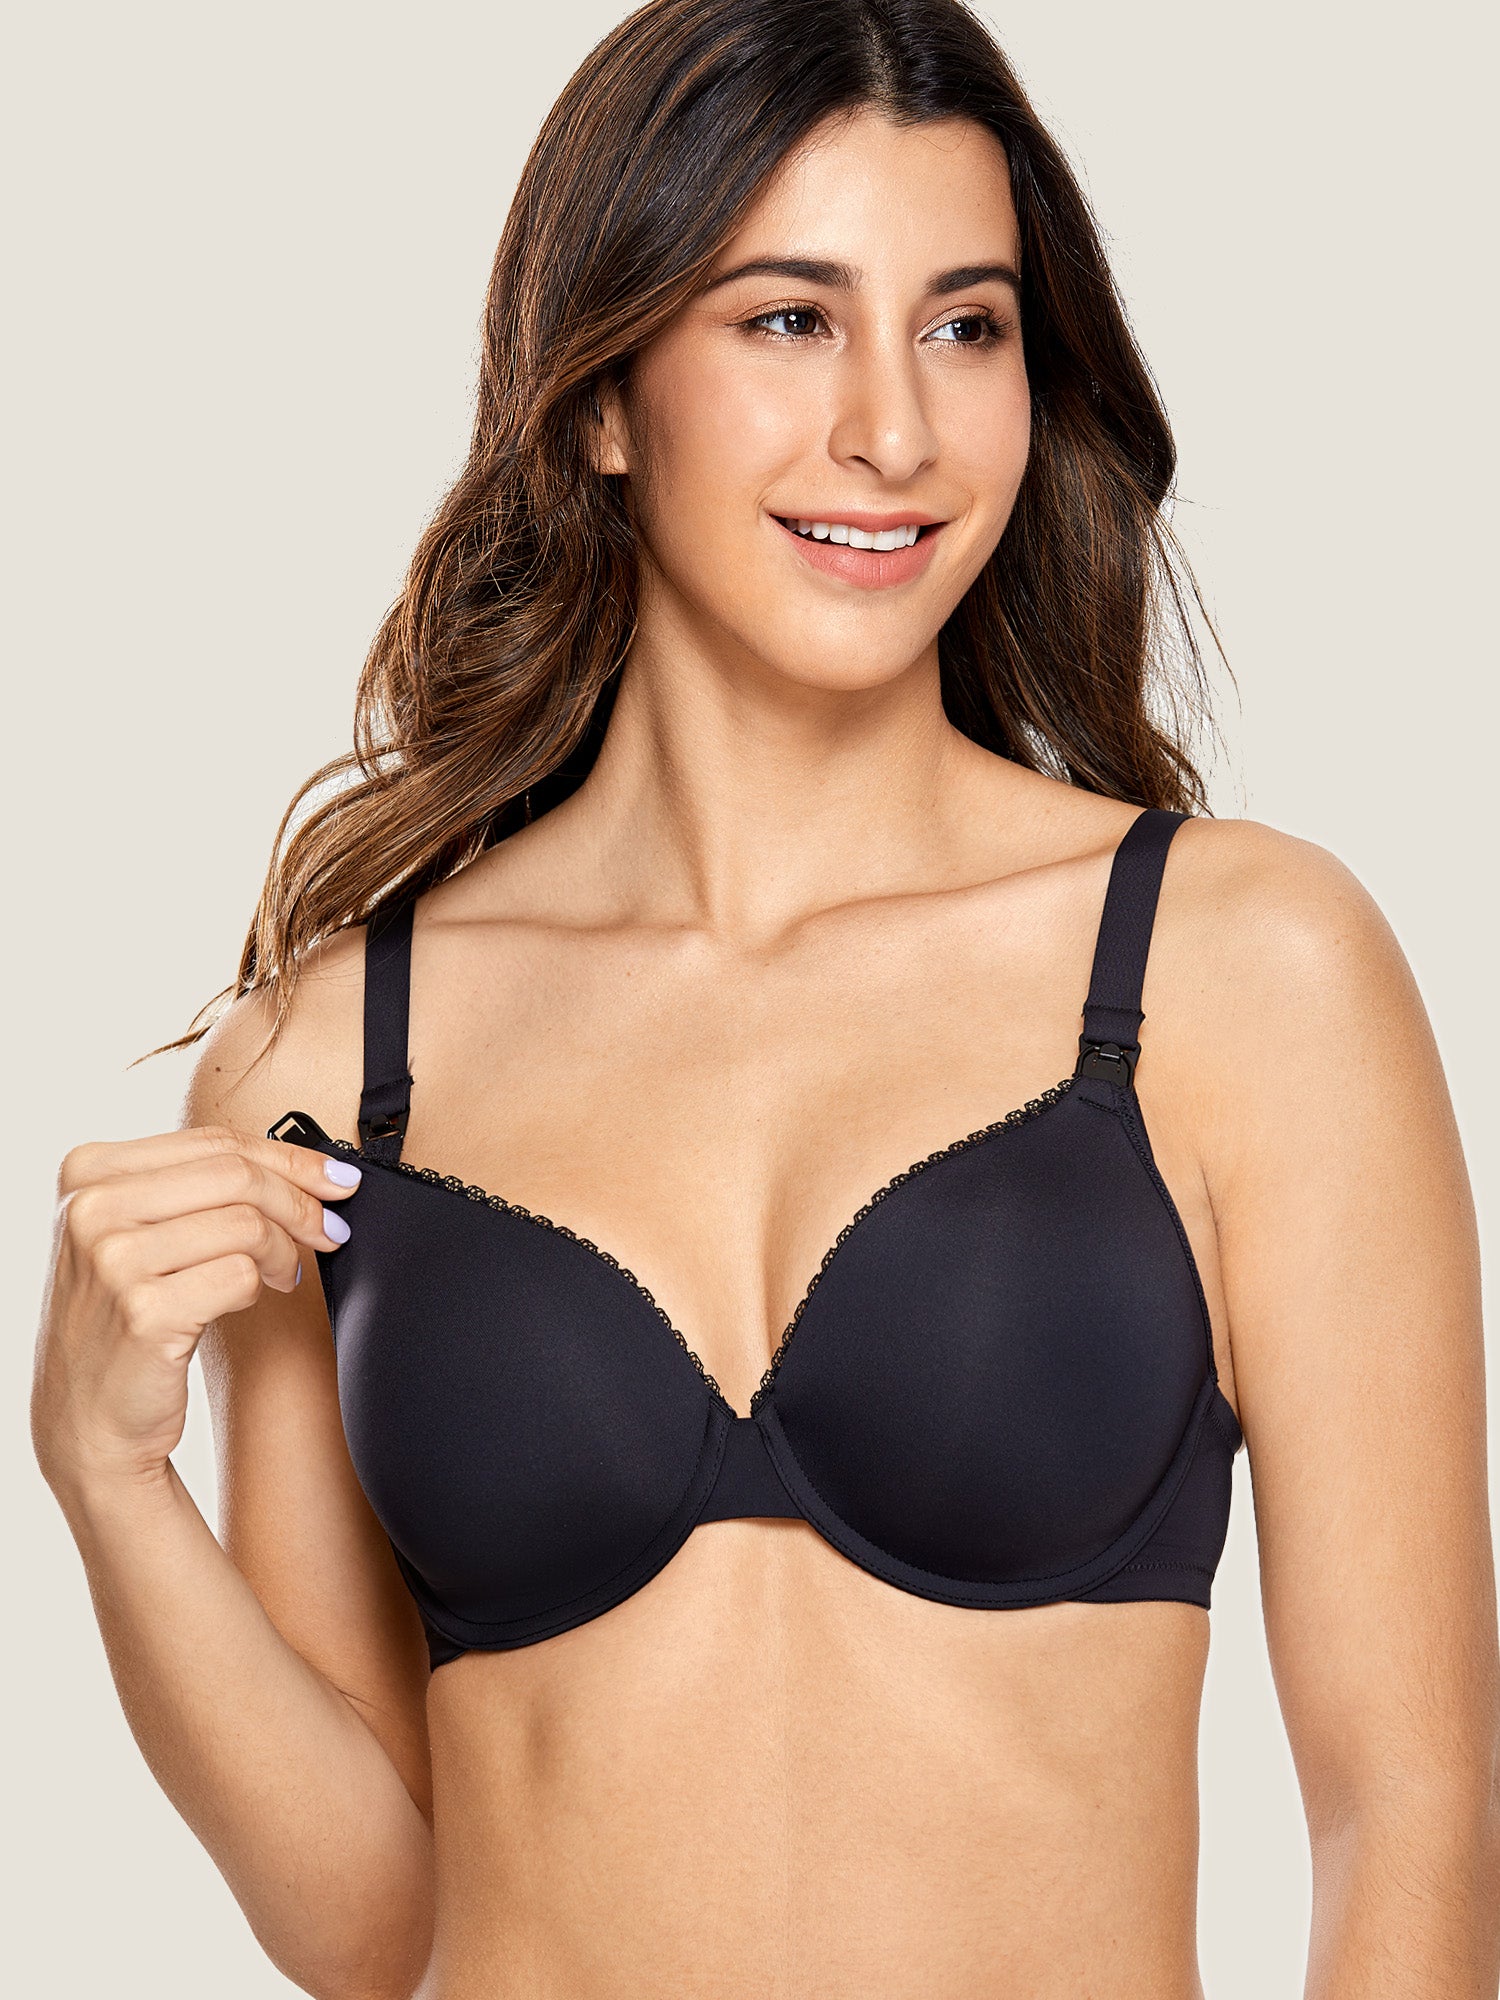 Beyond the H-Cup Bra: 25 bra brands that offer I cup bras or bigger